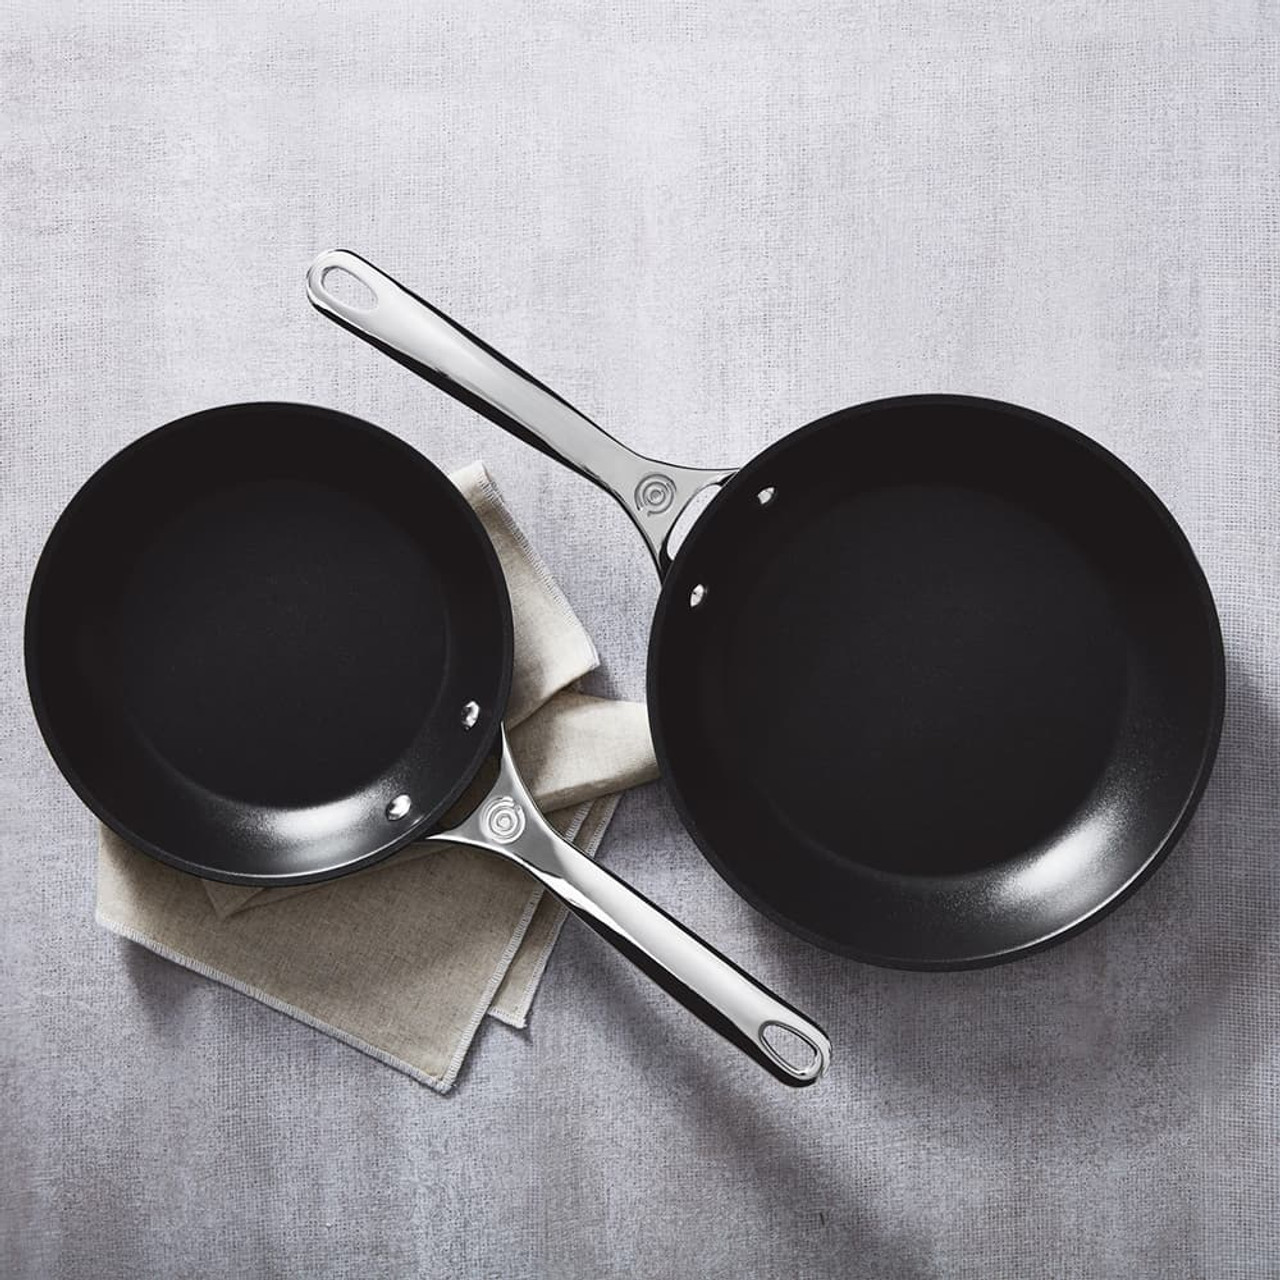 Le Creuset Toughened Nonstick PRO 8- and 10-Inch Fry Pan Set